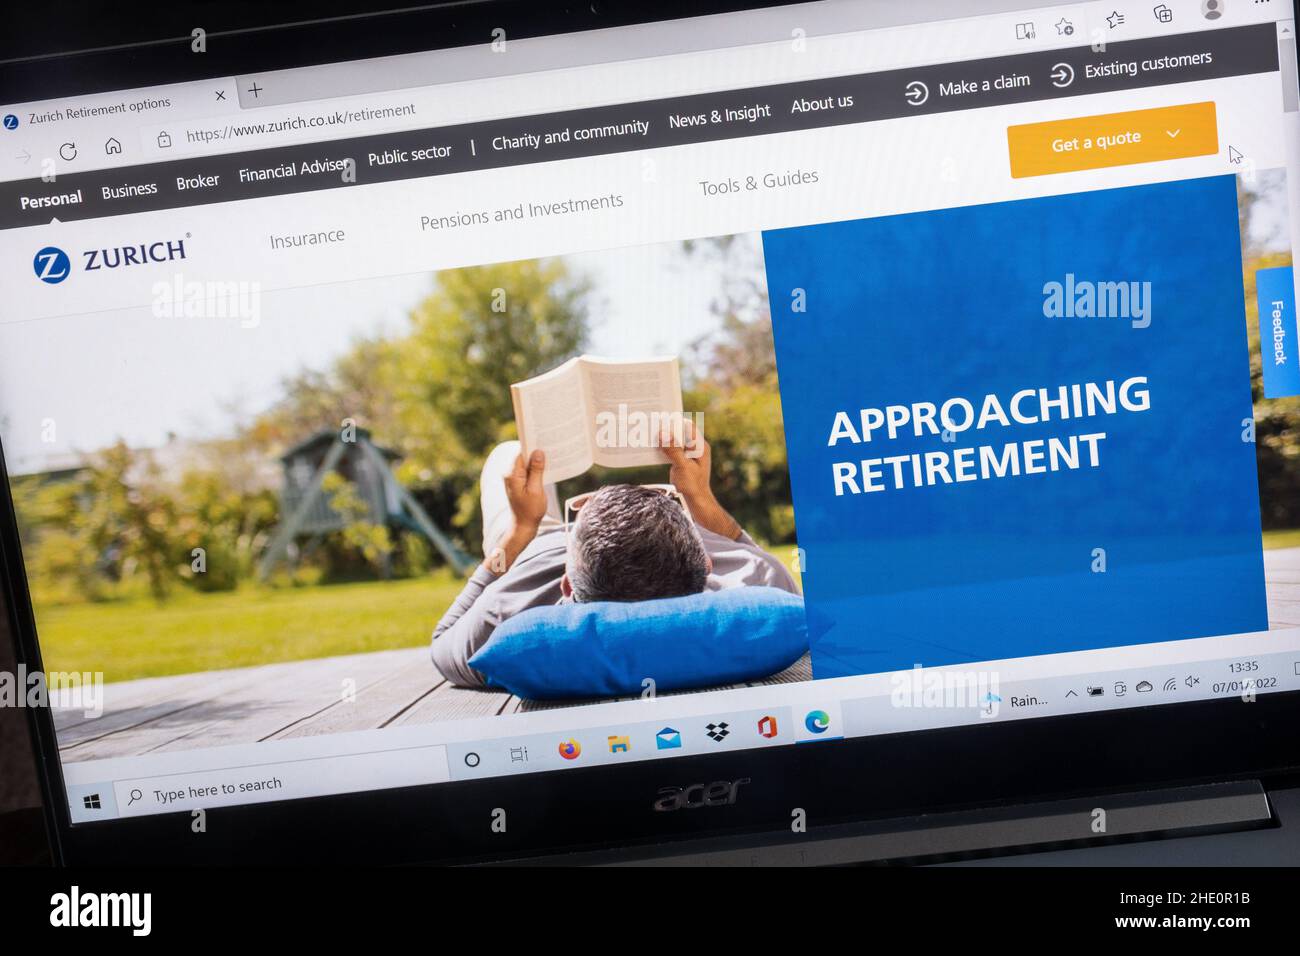 Zurich Insurance company website on a laptop computer, UK. Pensions and investments advice page, approaching retirement. Stock Photo